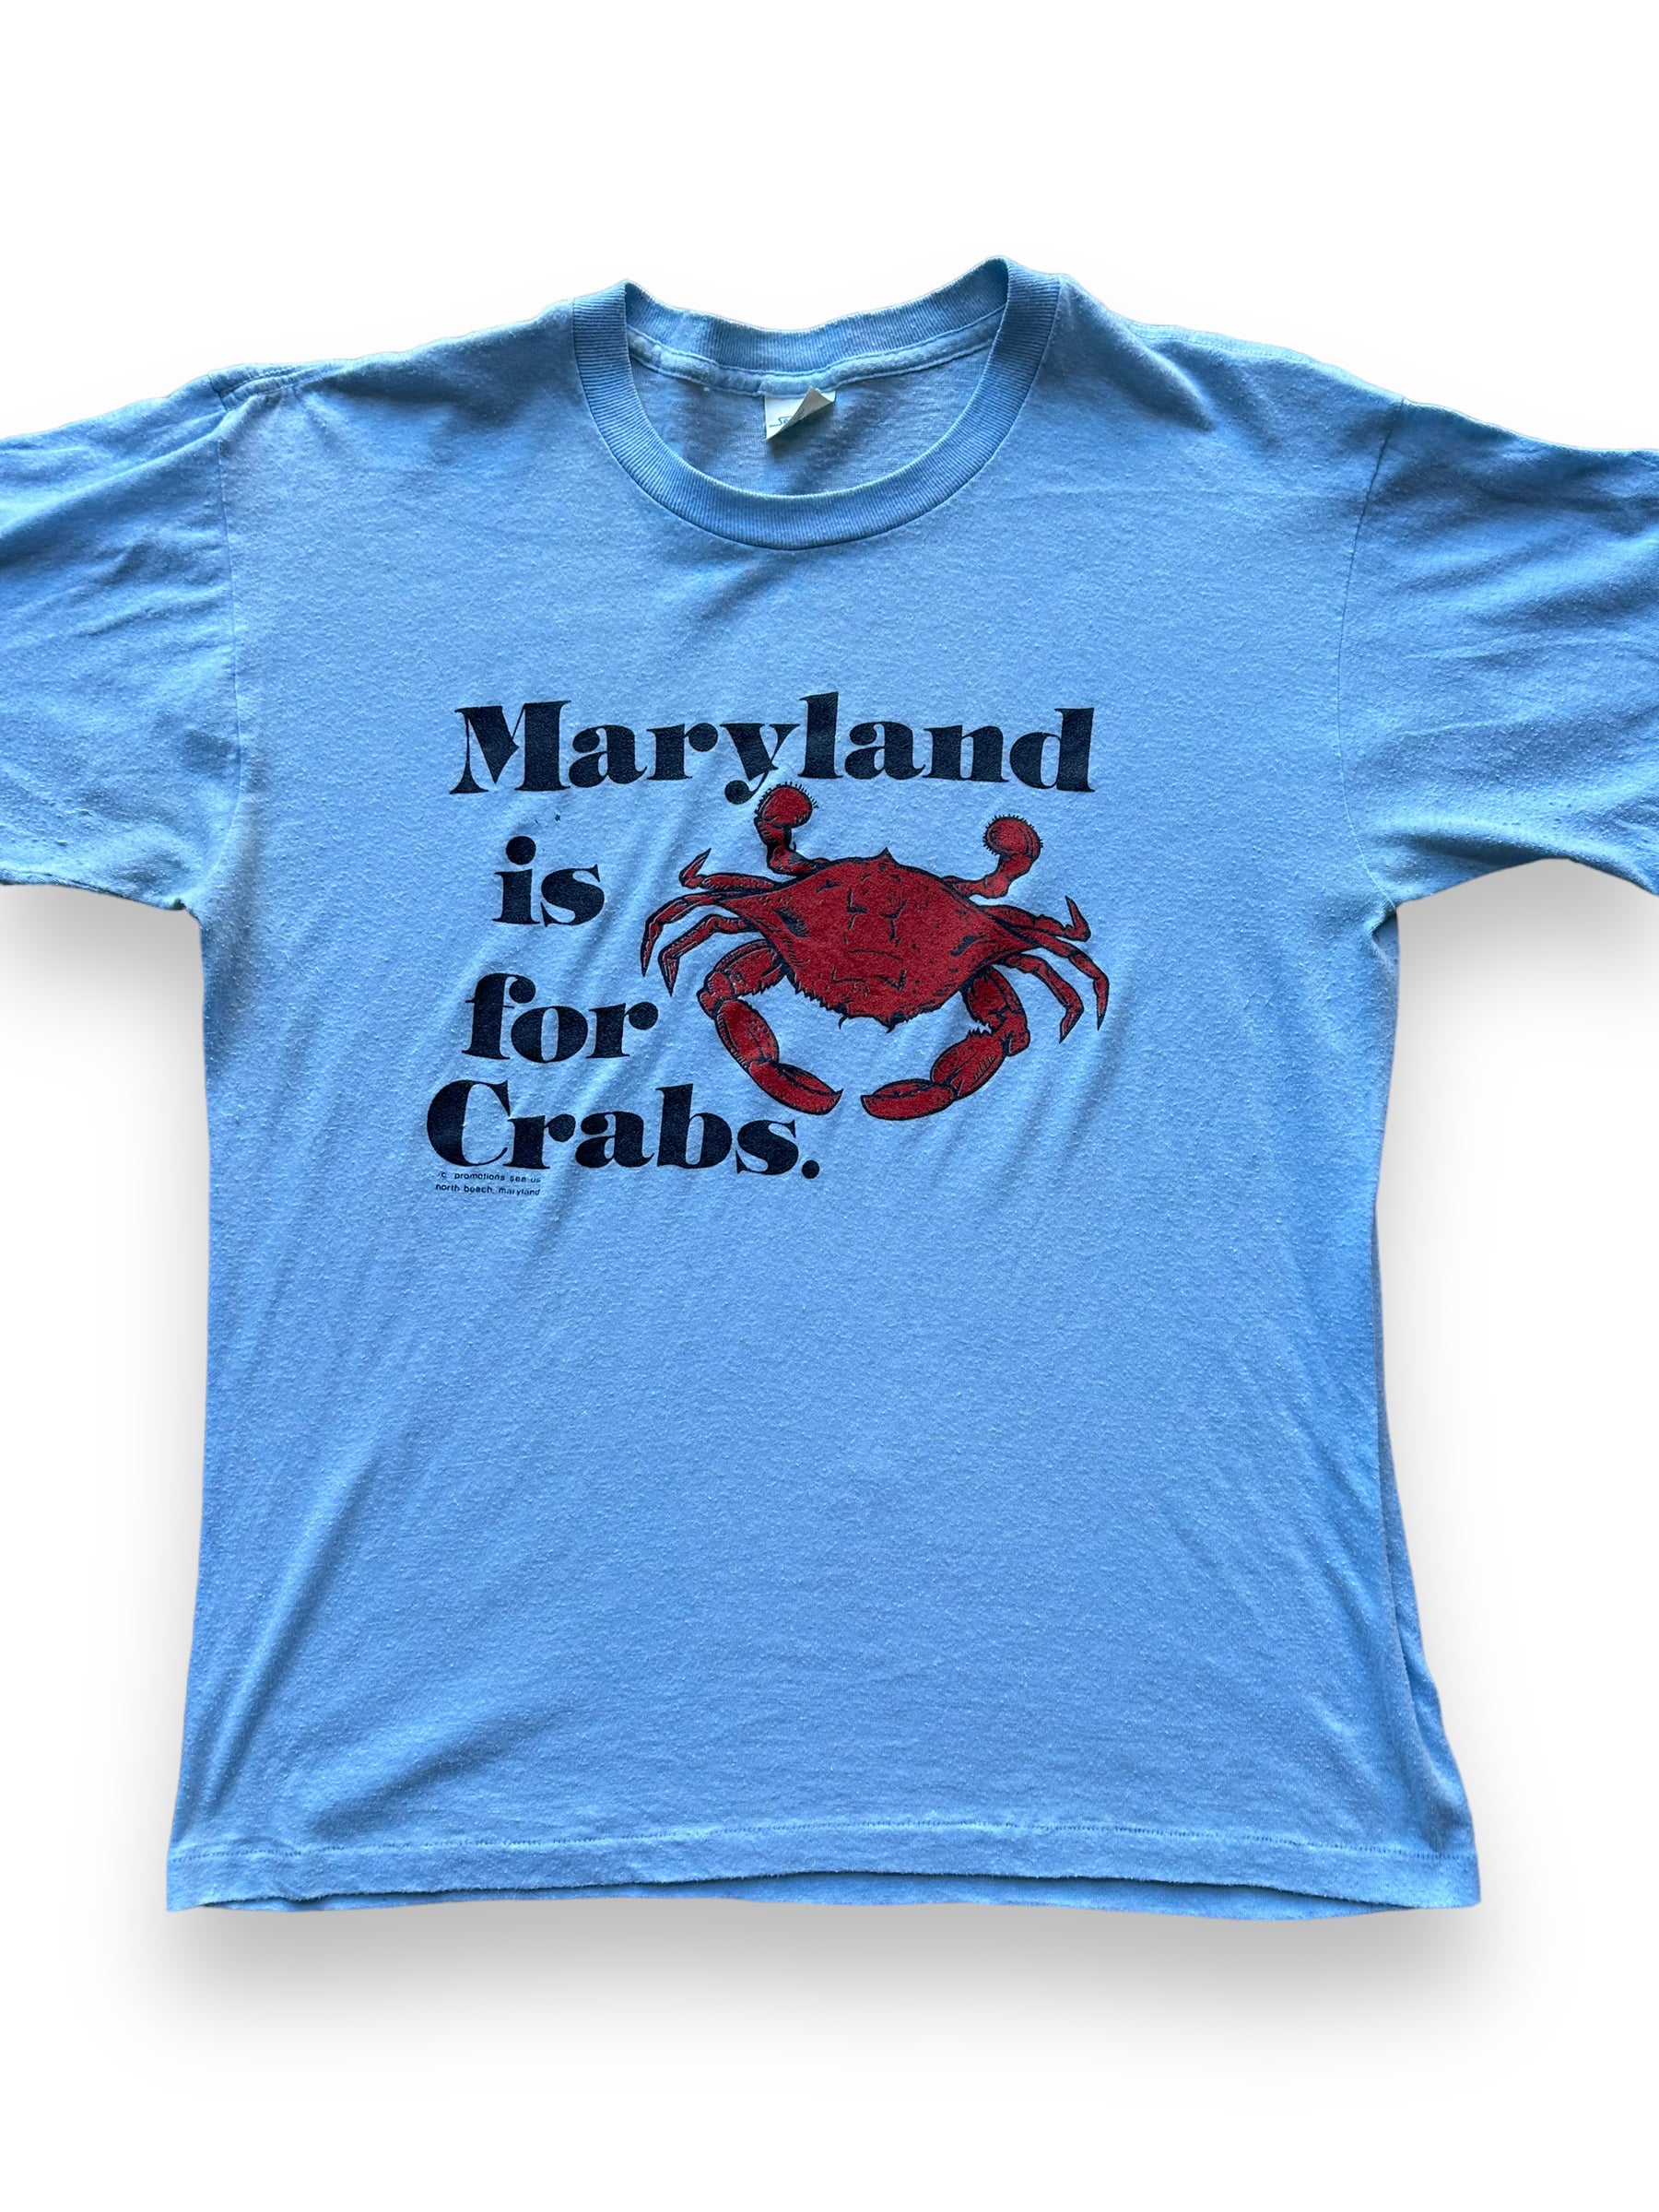 Front close up of Vintage "Maryland is for Crabs" Tee SZ L |  Vintage Fishing Tee Seattle | Barn Owl Vintage